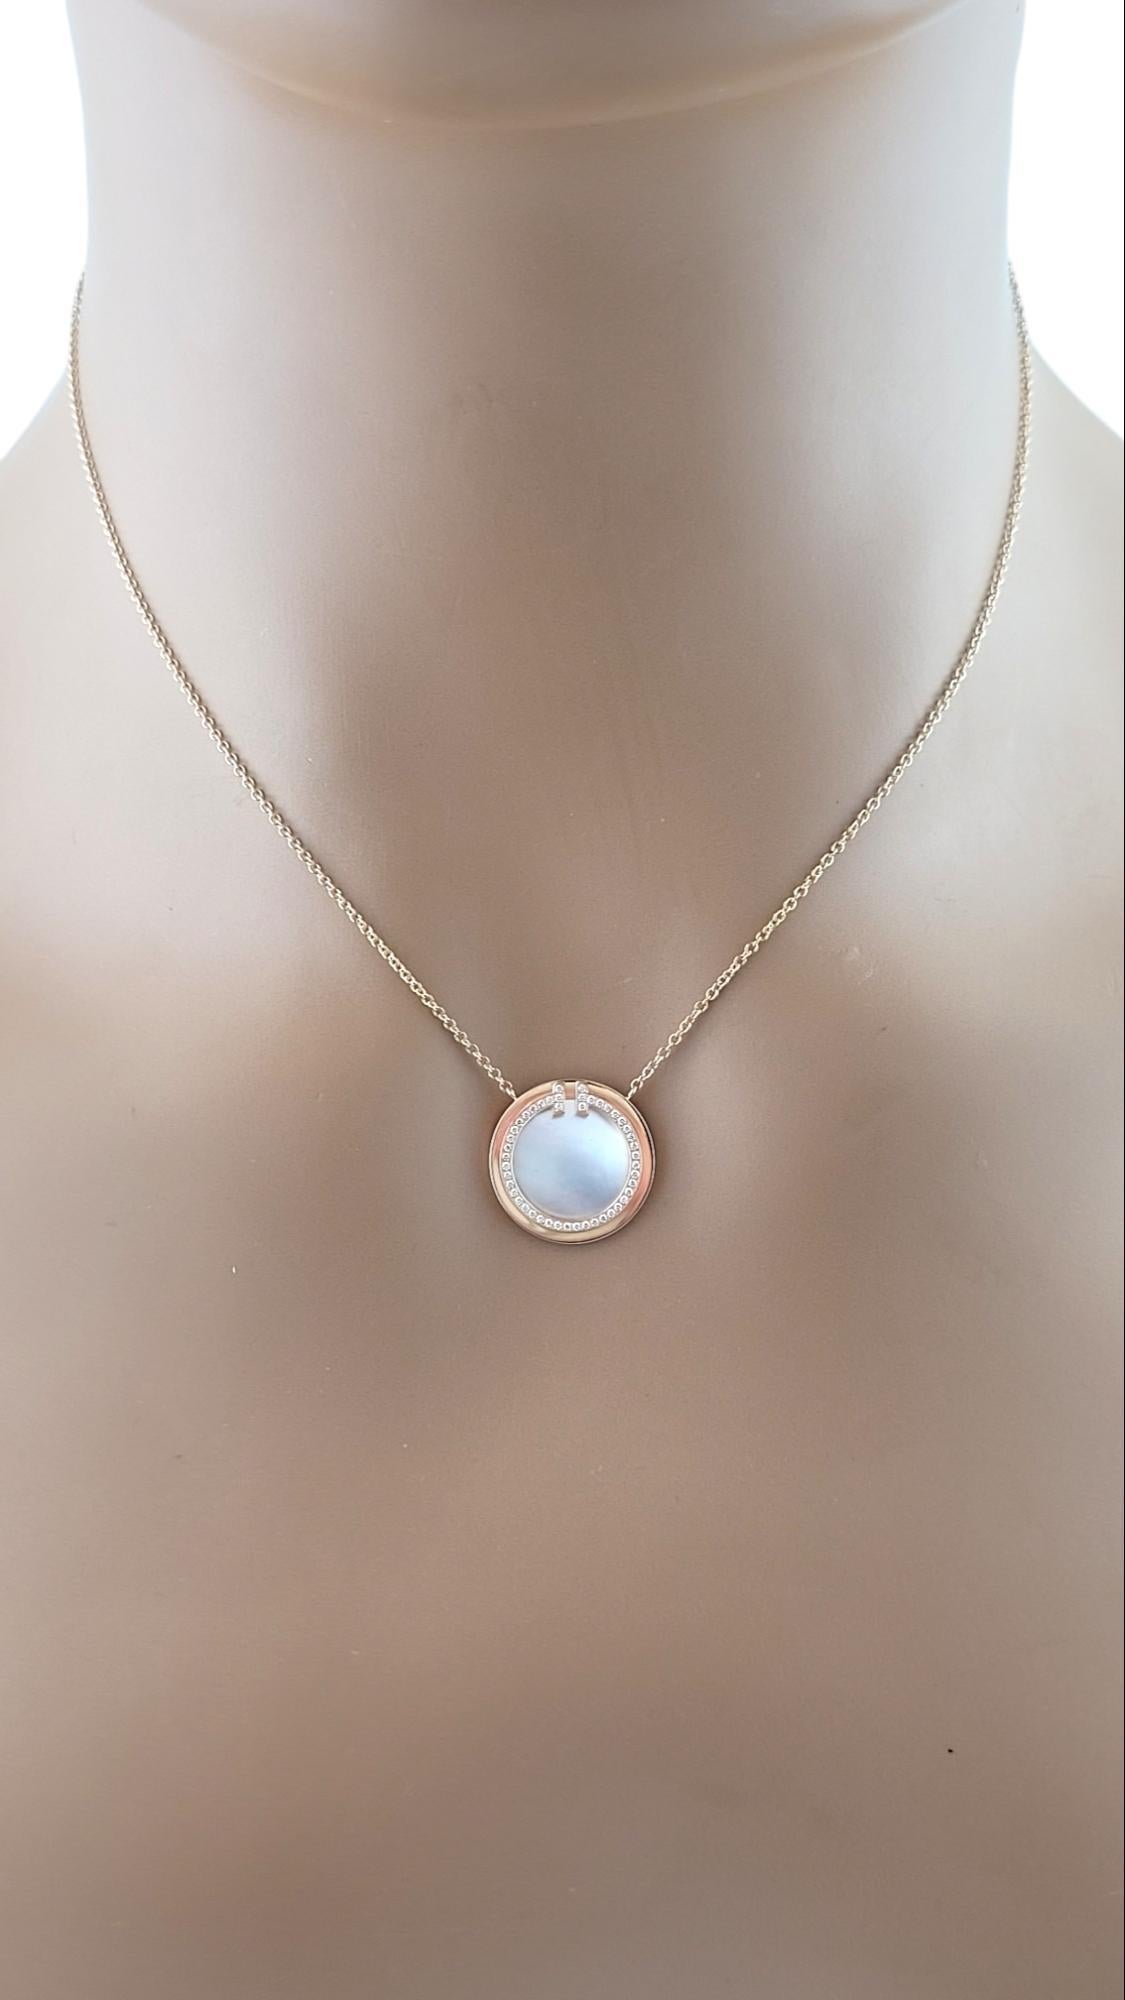 Tiffany & Co. 18K Rose Gold Diamond Mother of Pearl Necklace #17042 For Sale 1